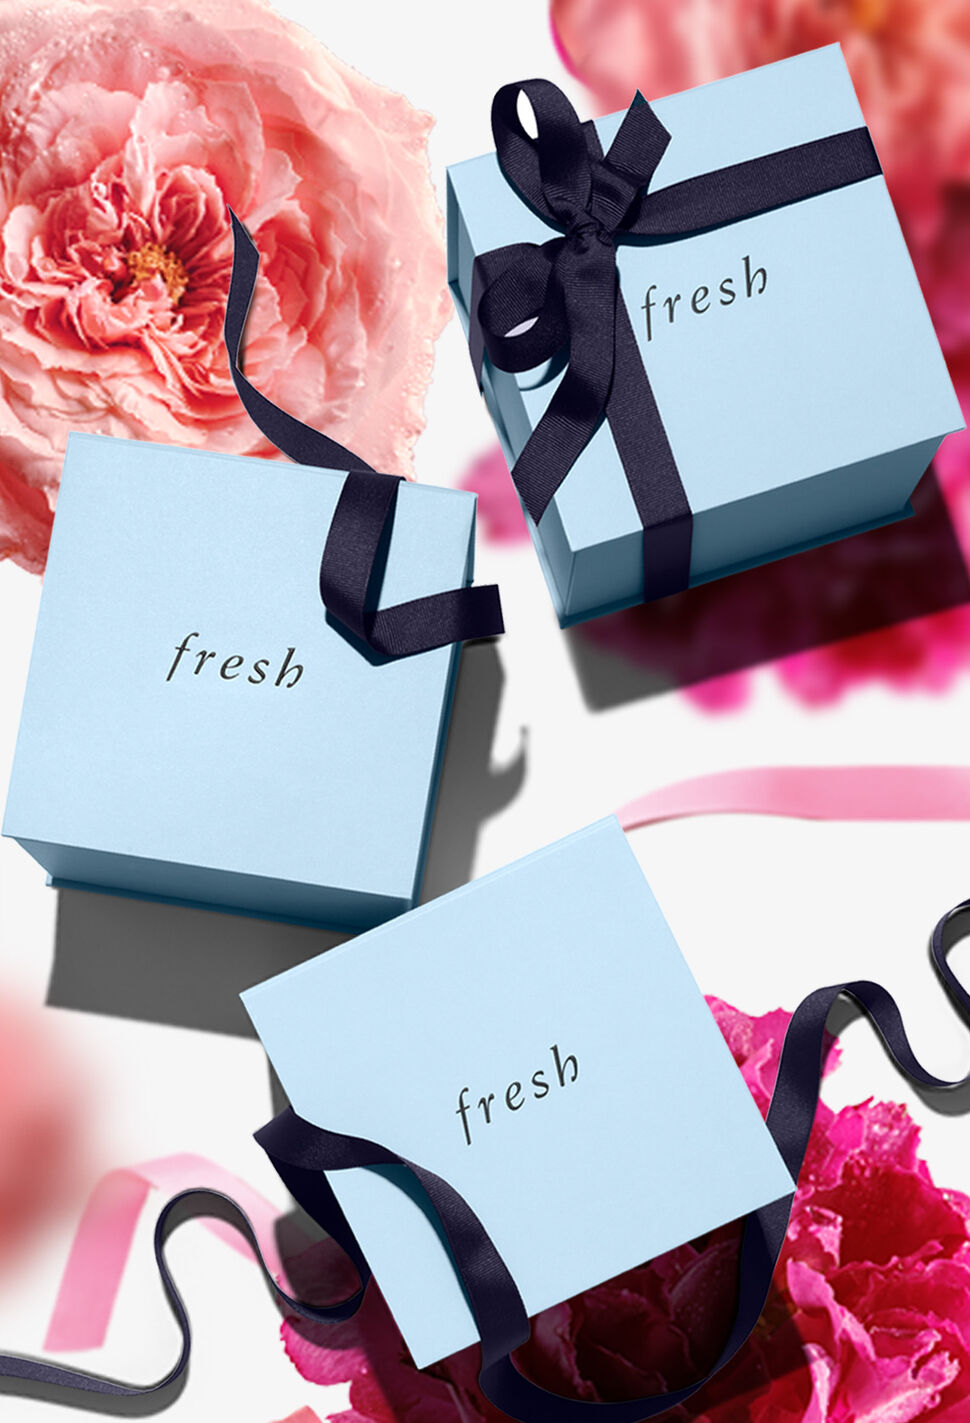 Eau De Mummy! Perfumes for Mother's Day